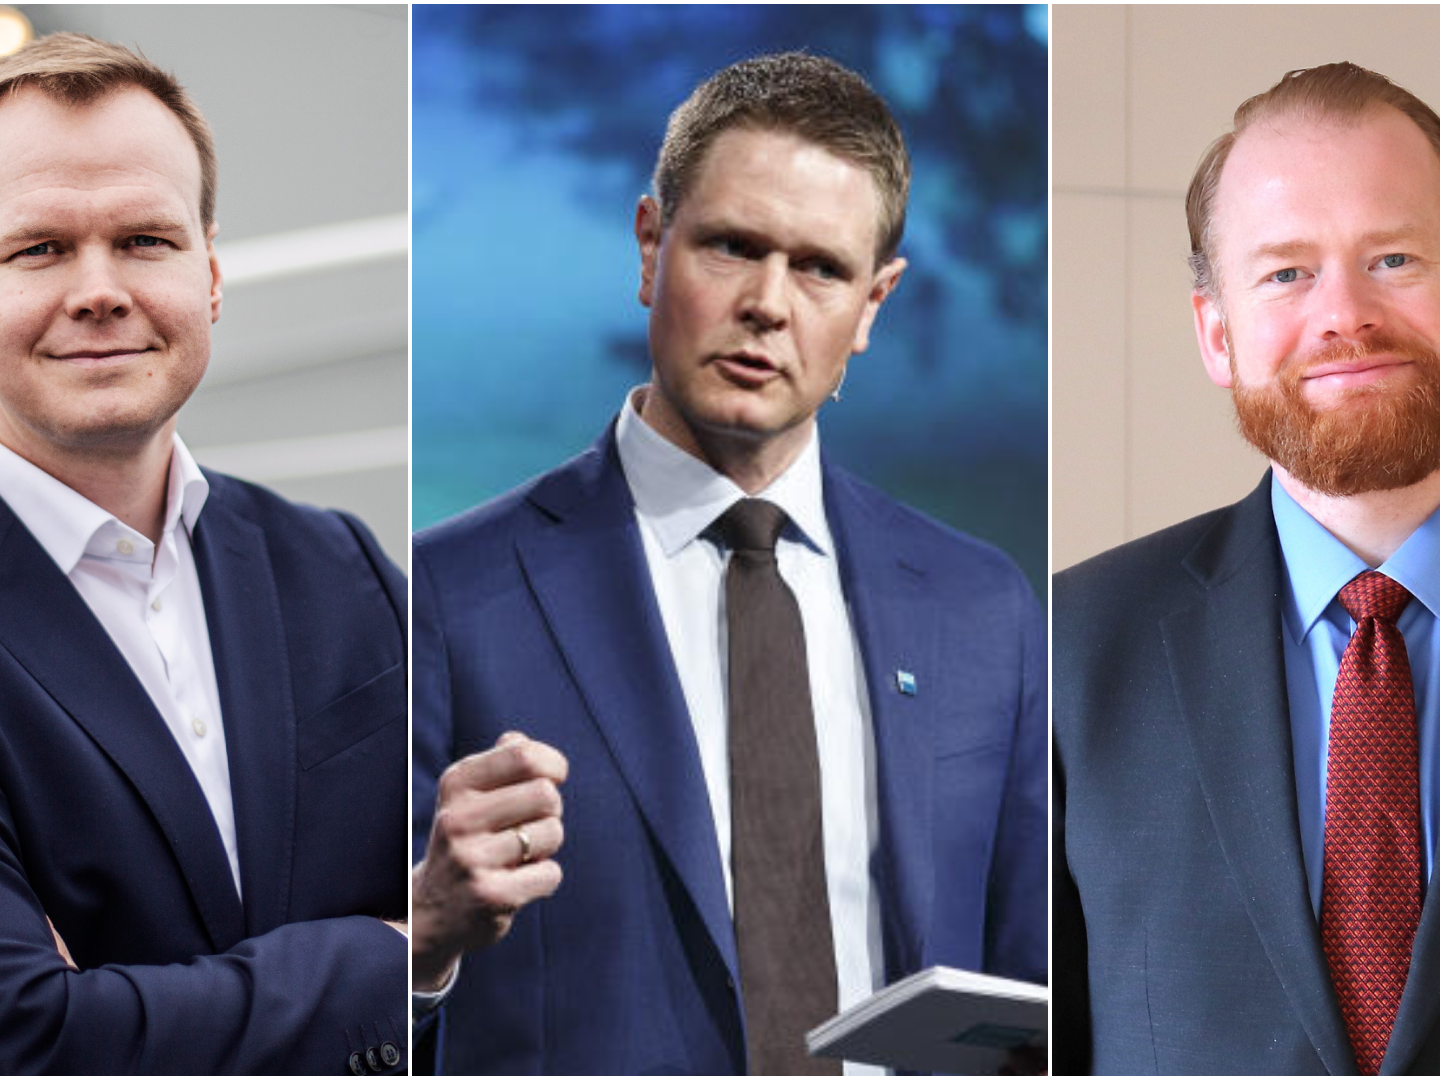 From left: André Risholm of Amon Maritime, Harald Solberg of the Norwegian Shipowners' Association and Kristoffer Alexander Rolland of the Federation of Norwegian Industries. | Photo: Amon Maritime, Norges Rederiforbund, Norsk Industri